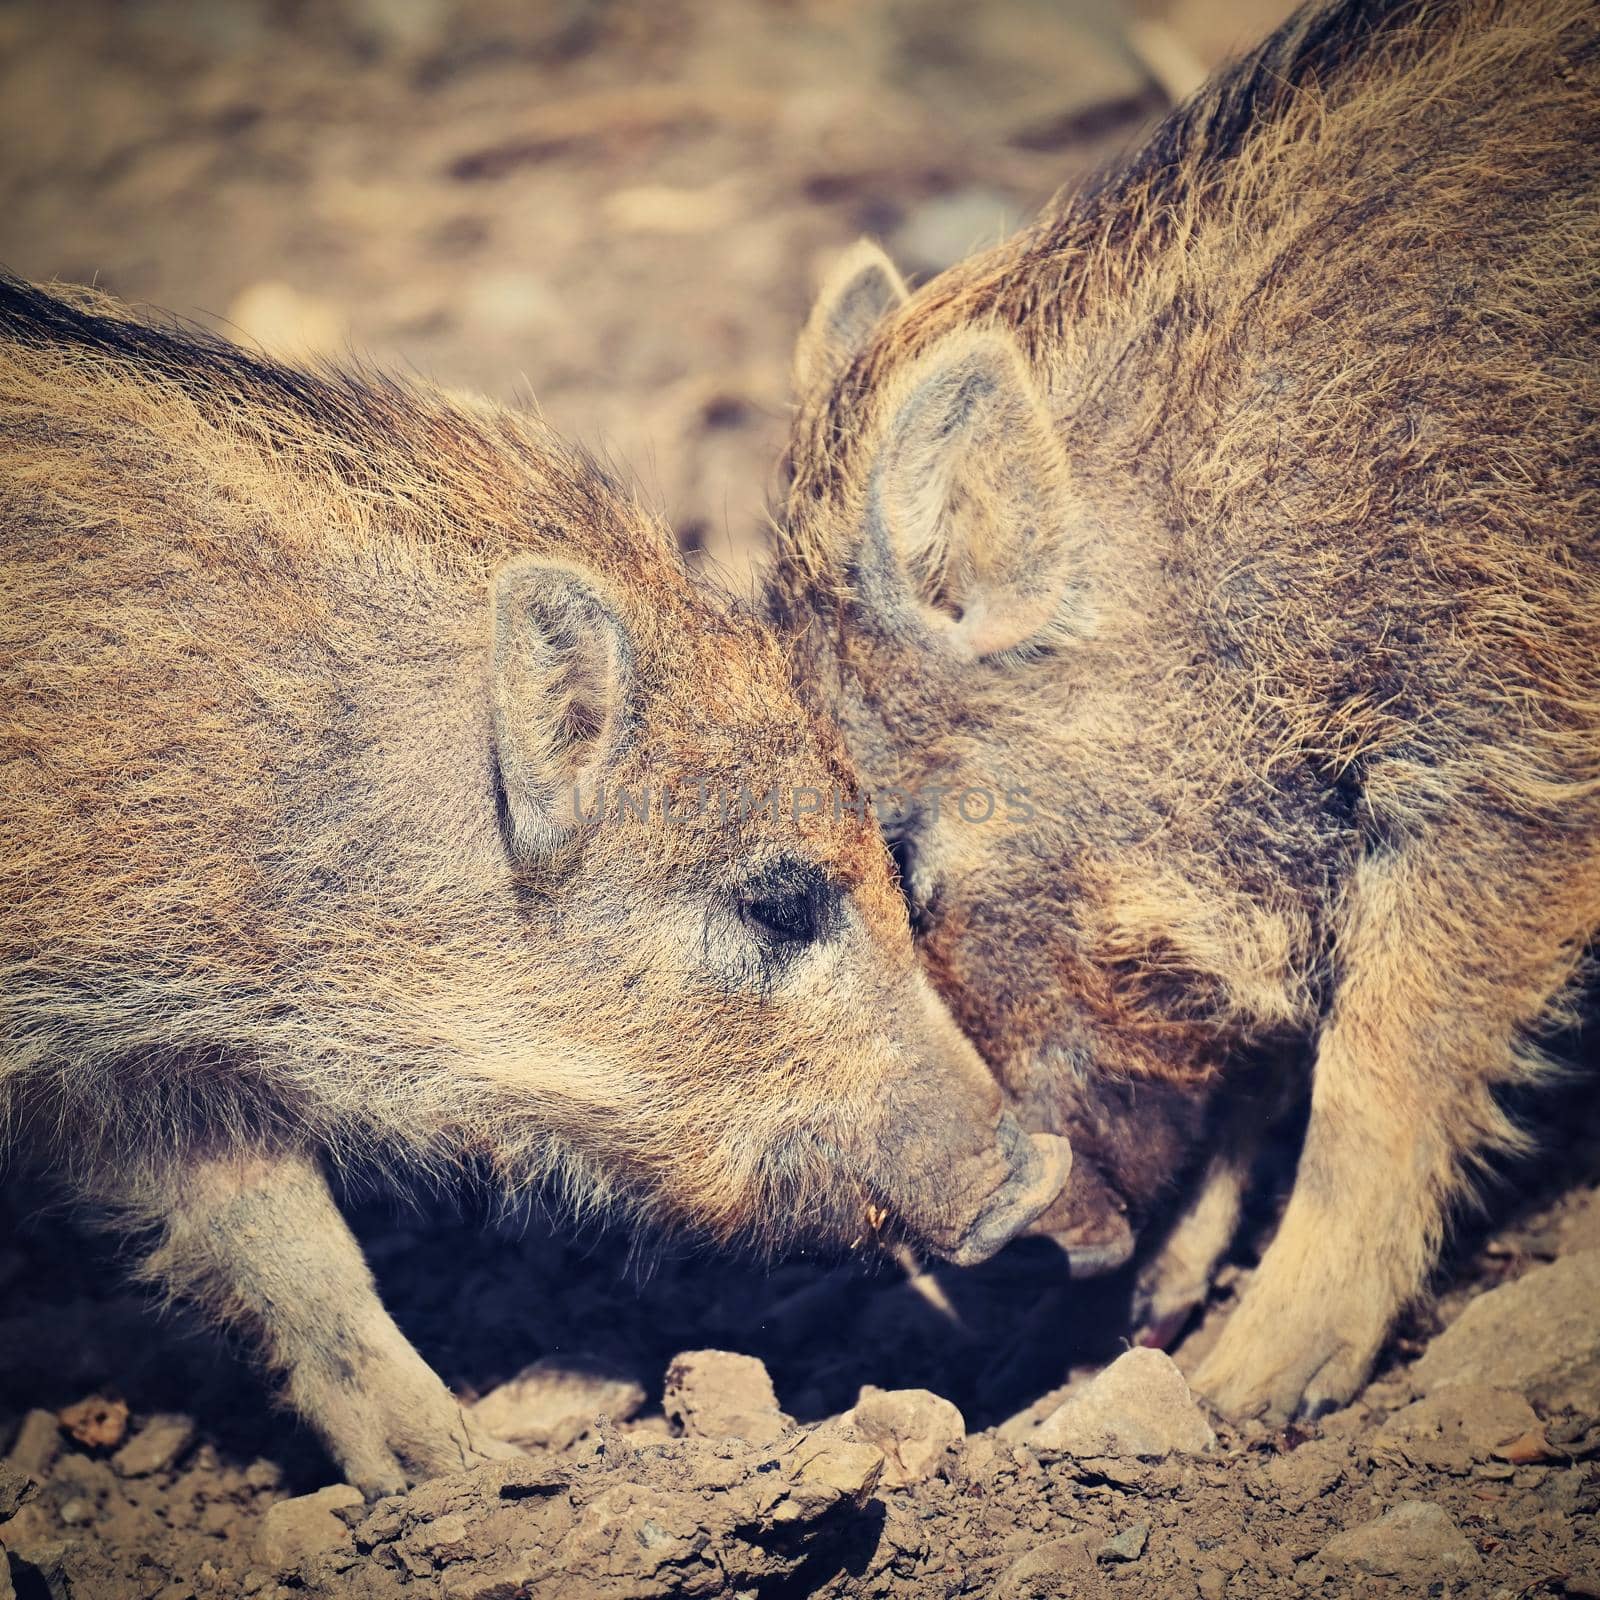 Beautiful little pigs wild in nature. Wild boar. Animal in the forest